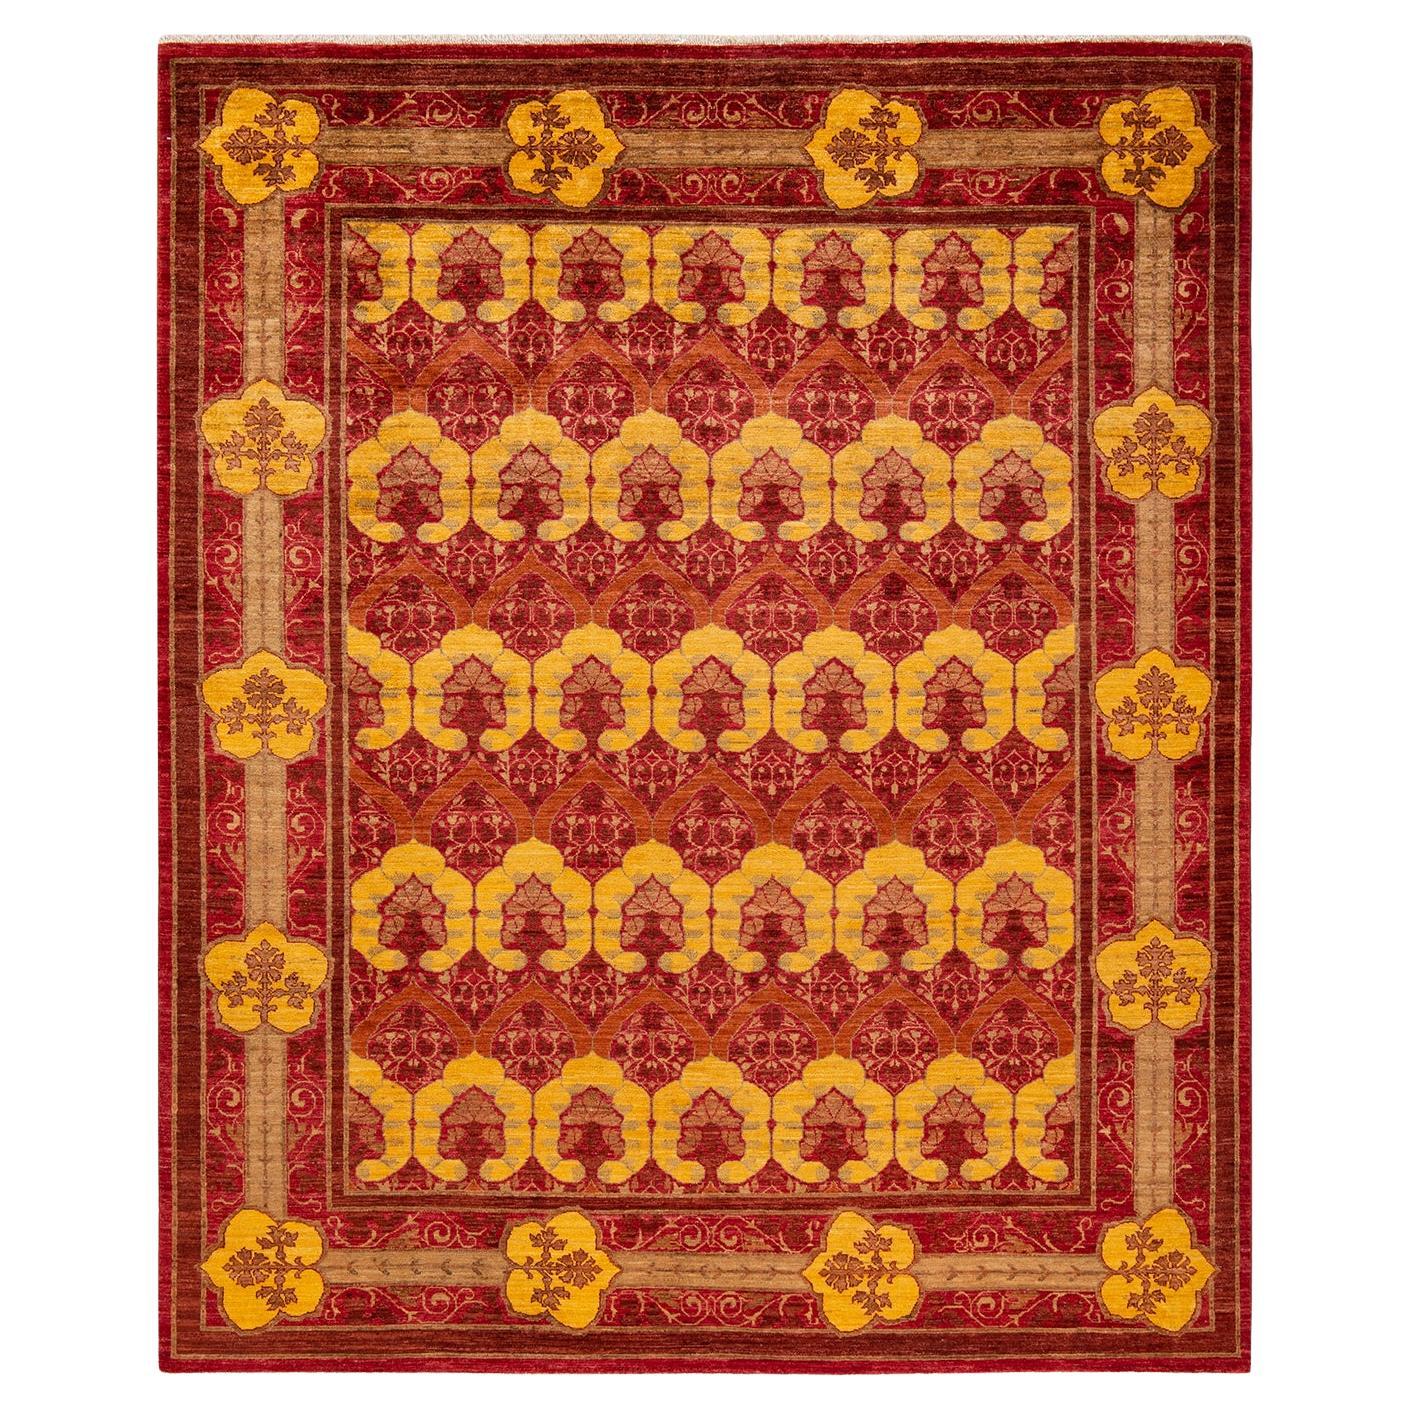 Contemporary Arts & Crafts Hand Knotted Wool Red Area Rug